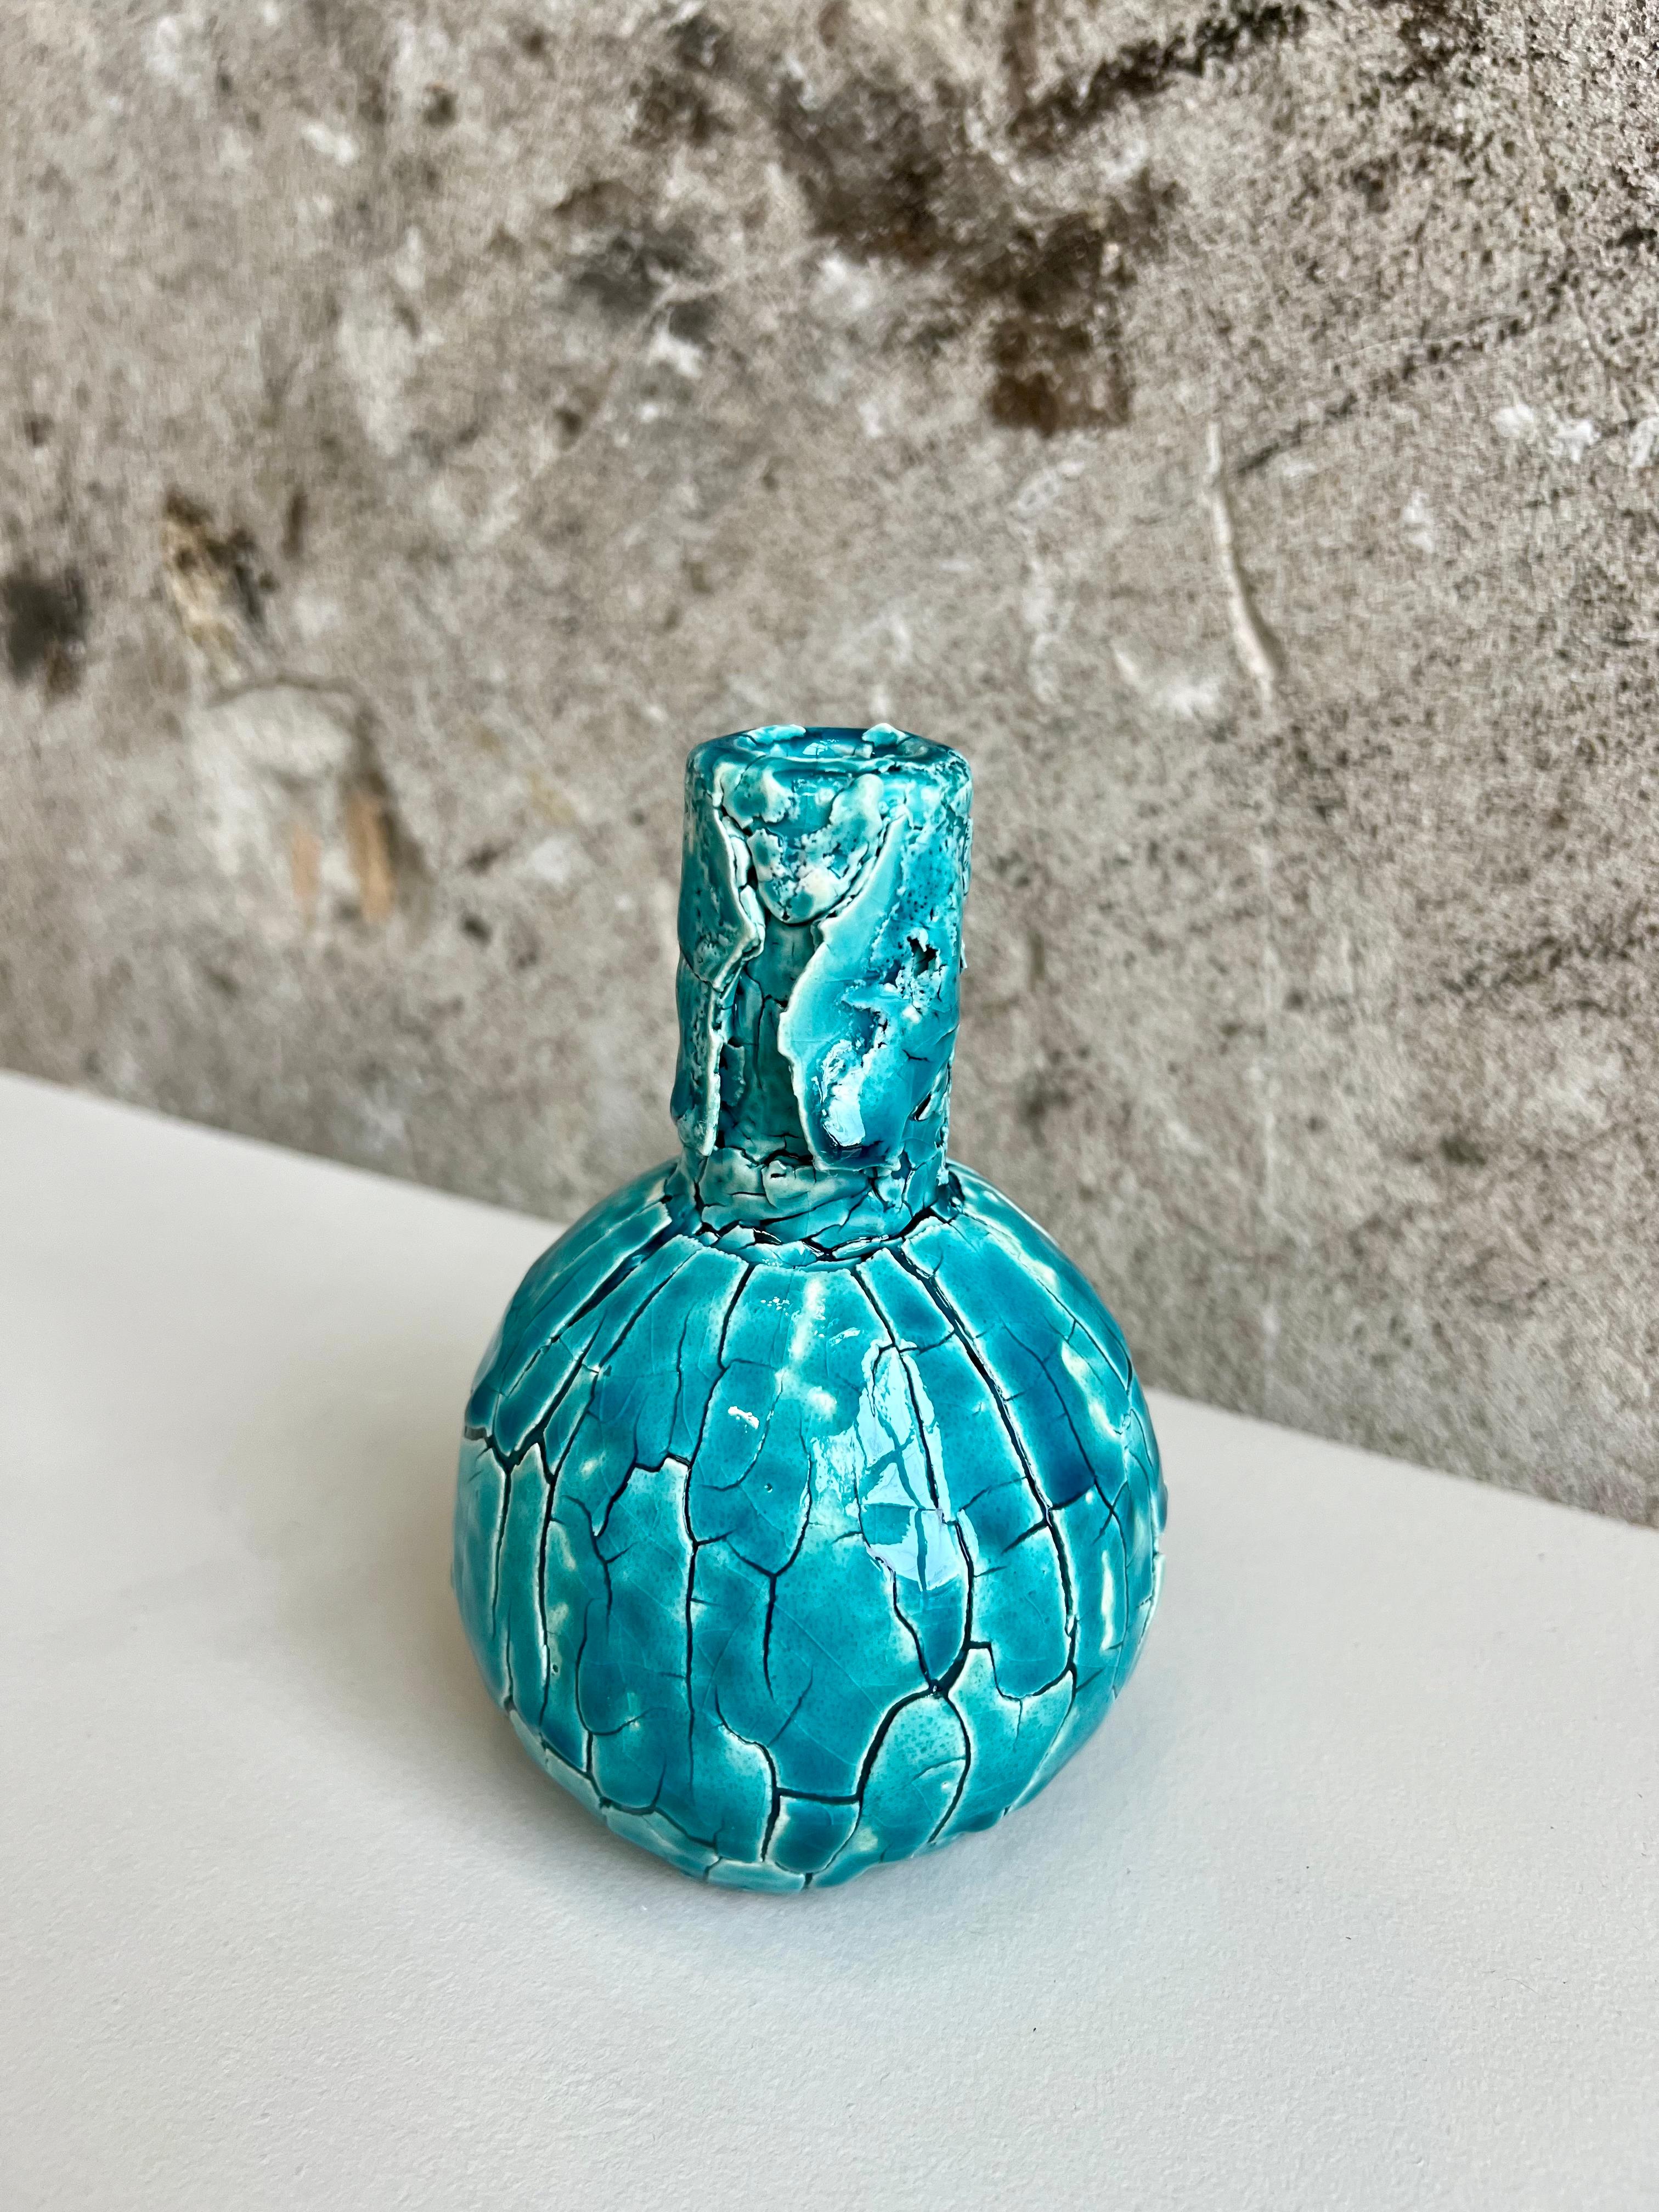 Small spherical vase with incredible crackle texture from handcrafting techniques.  In a beautiful blue and teal shade, this bud vase is functional and decorative. 

Teague’s work encompasses “everything under the sun,” he says, including